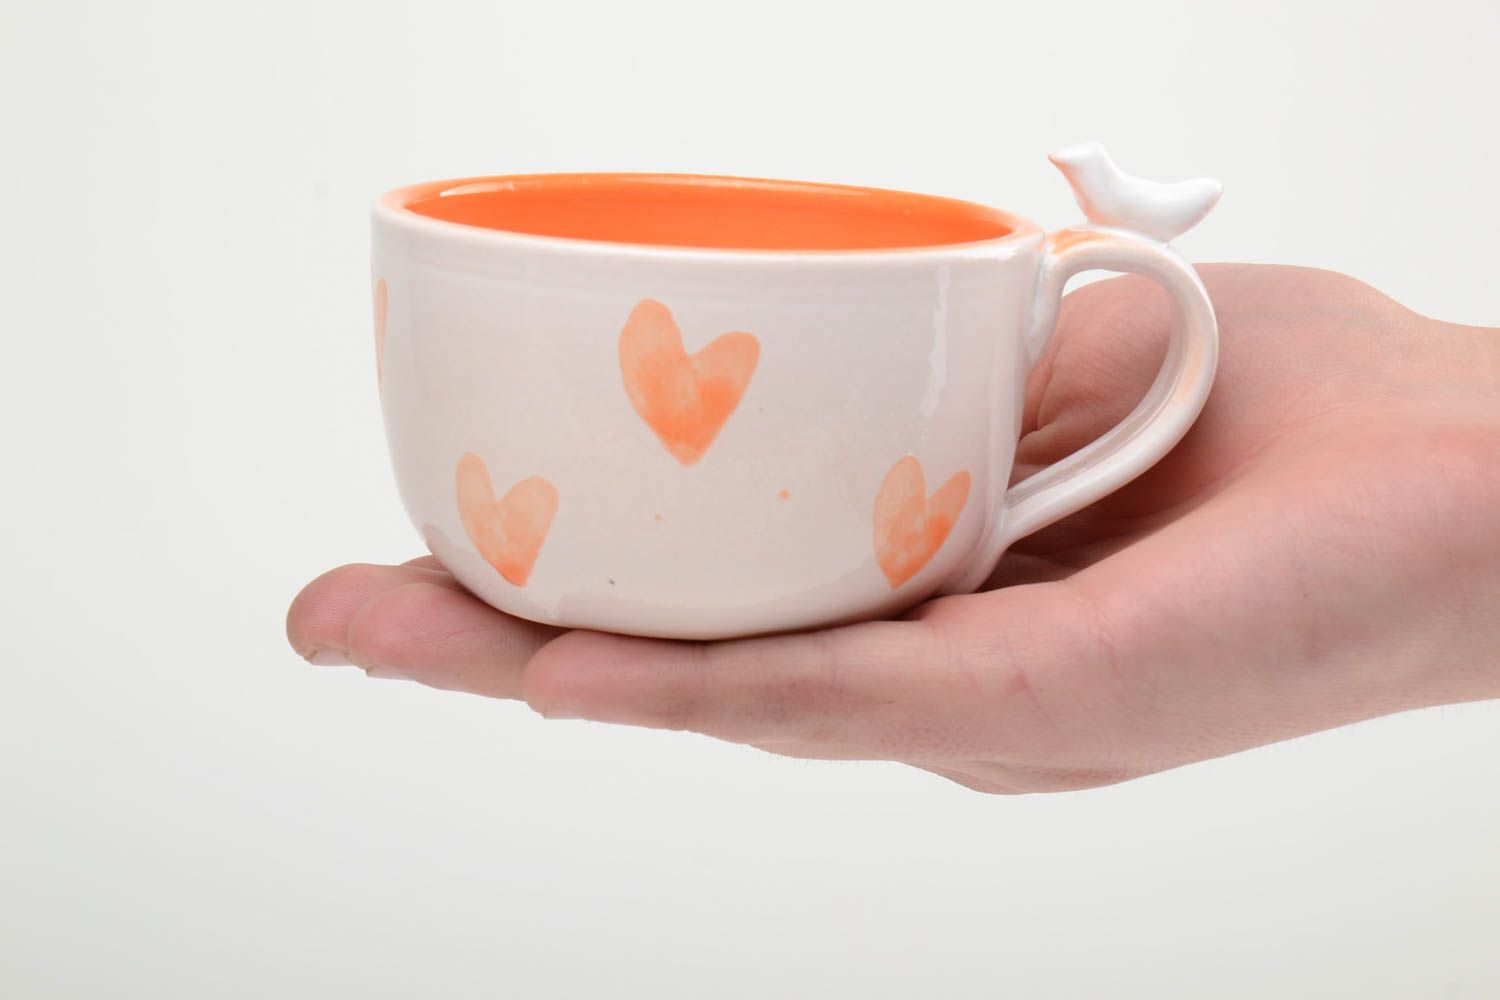 8 oz orange and white glazed ceramic teacup with a bird on handle and heart pattern photo 5